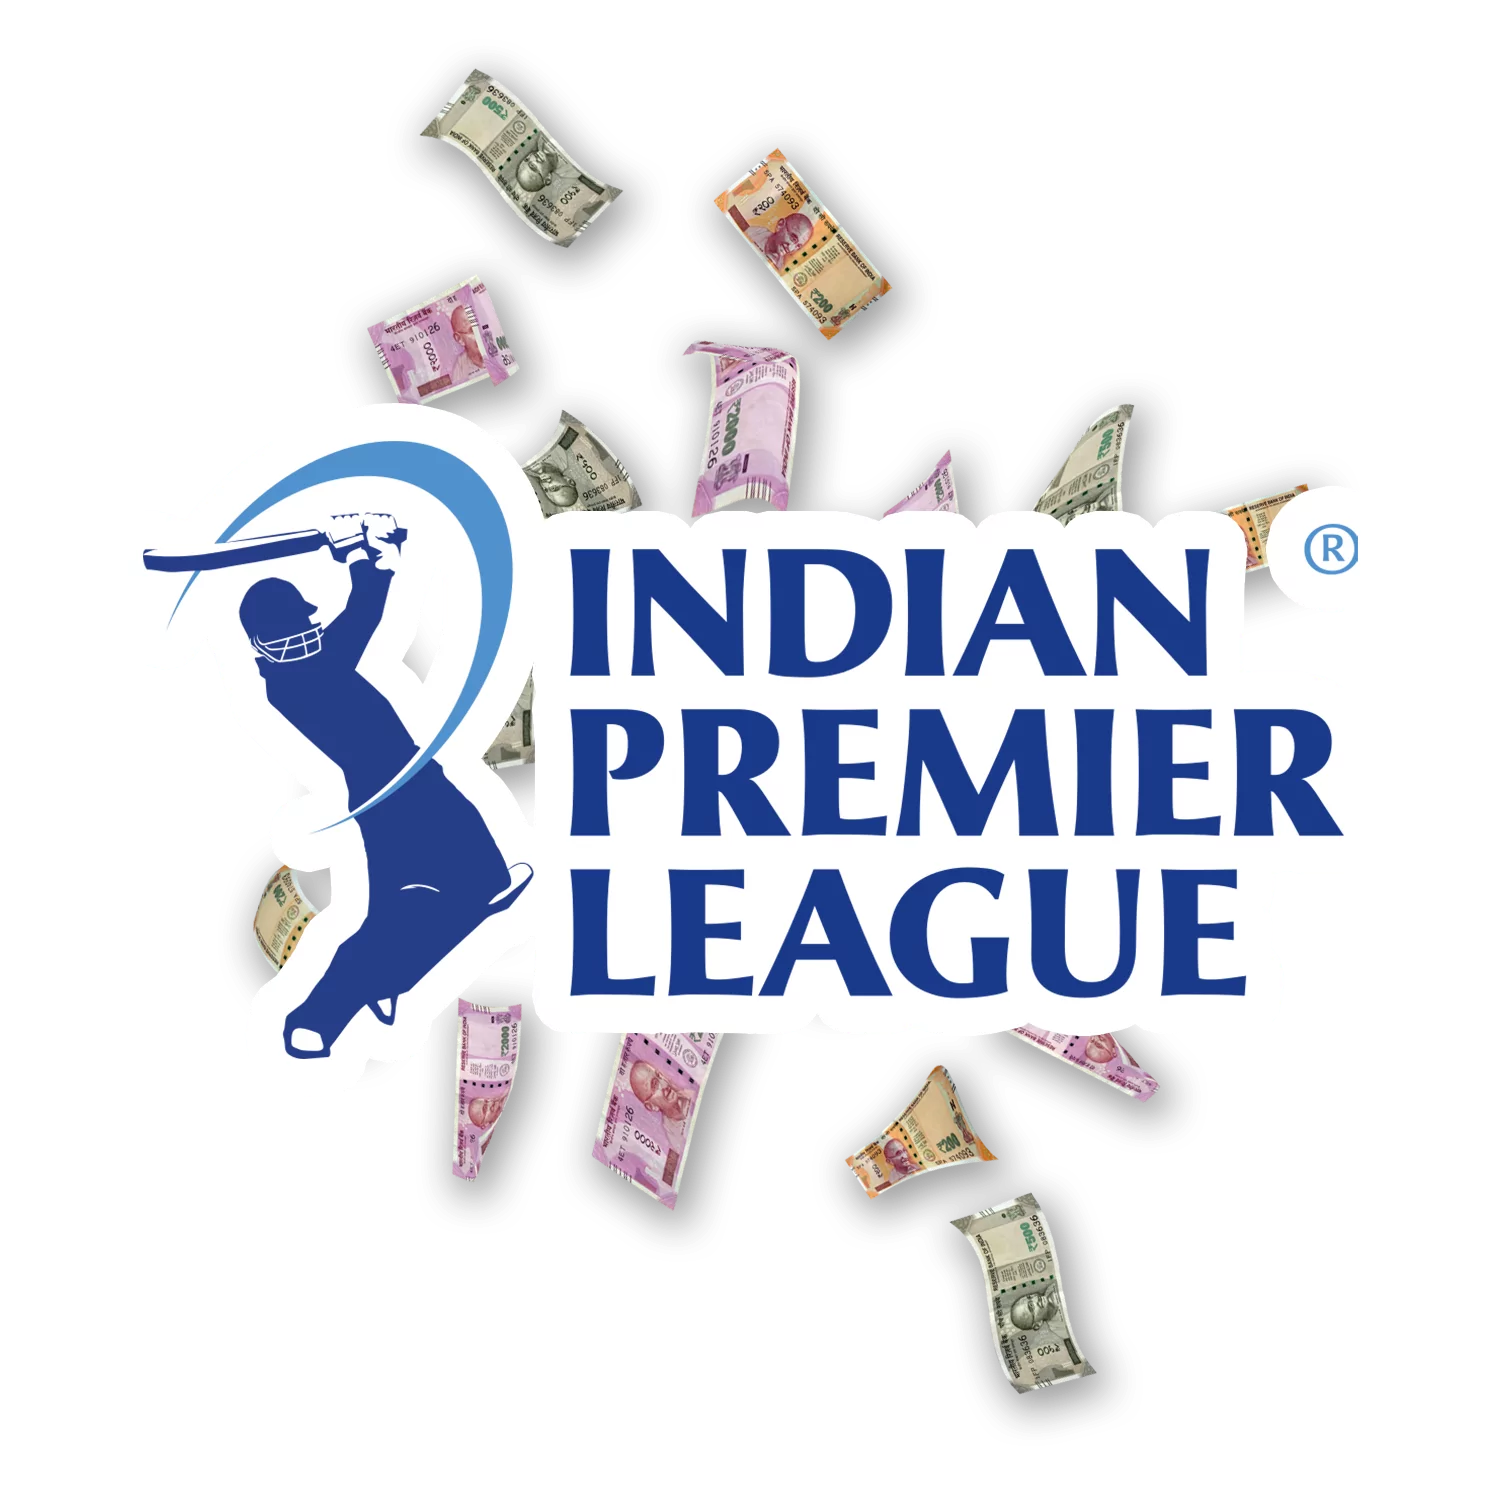 Here you can learn more about IPL cricket betting secure apps and sites and choose one to place bets on IPL.